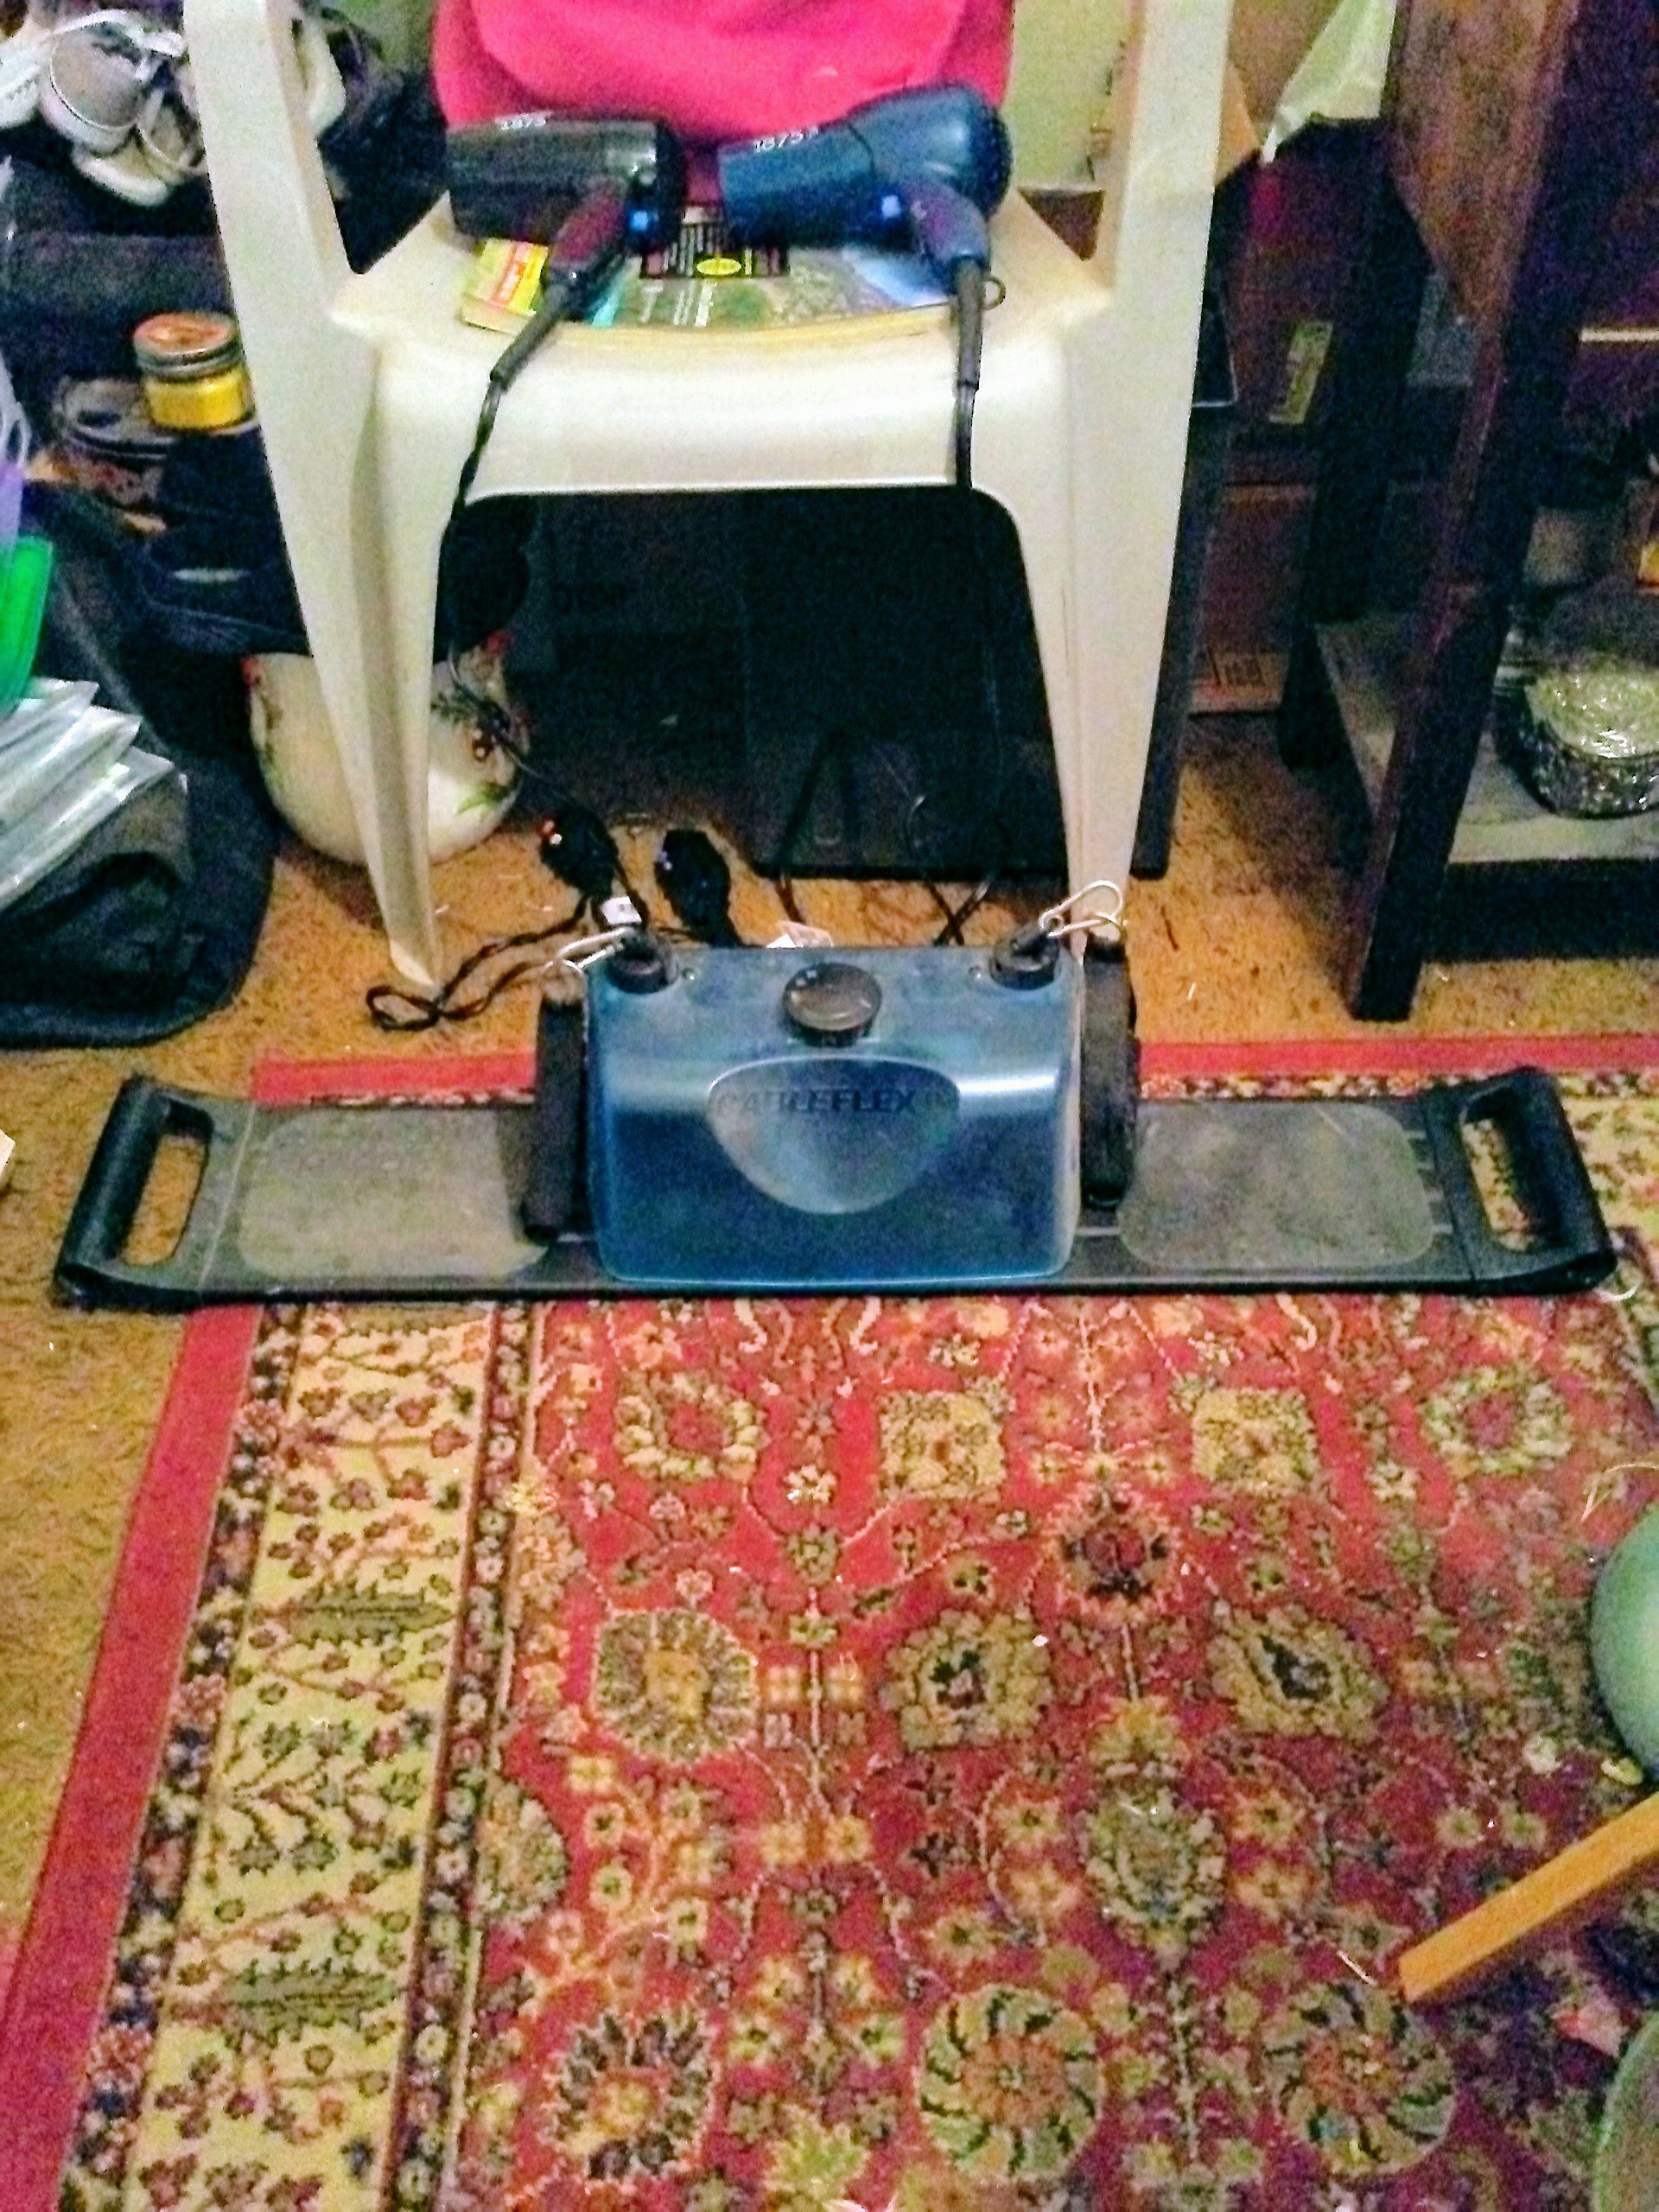 Excersise Machine & Check My Profile For 100+ Other Items!